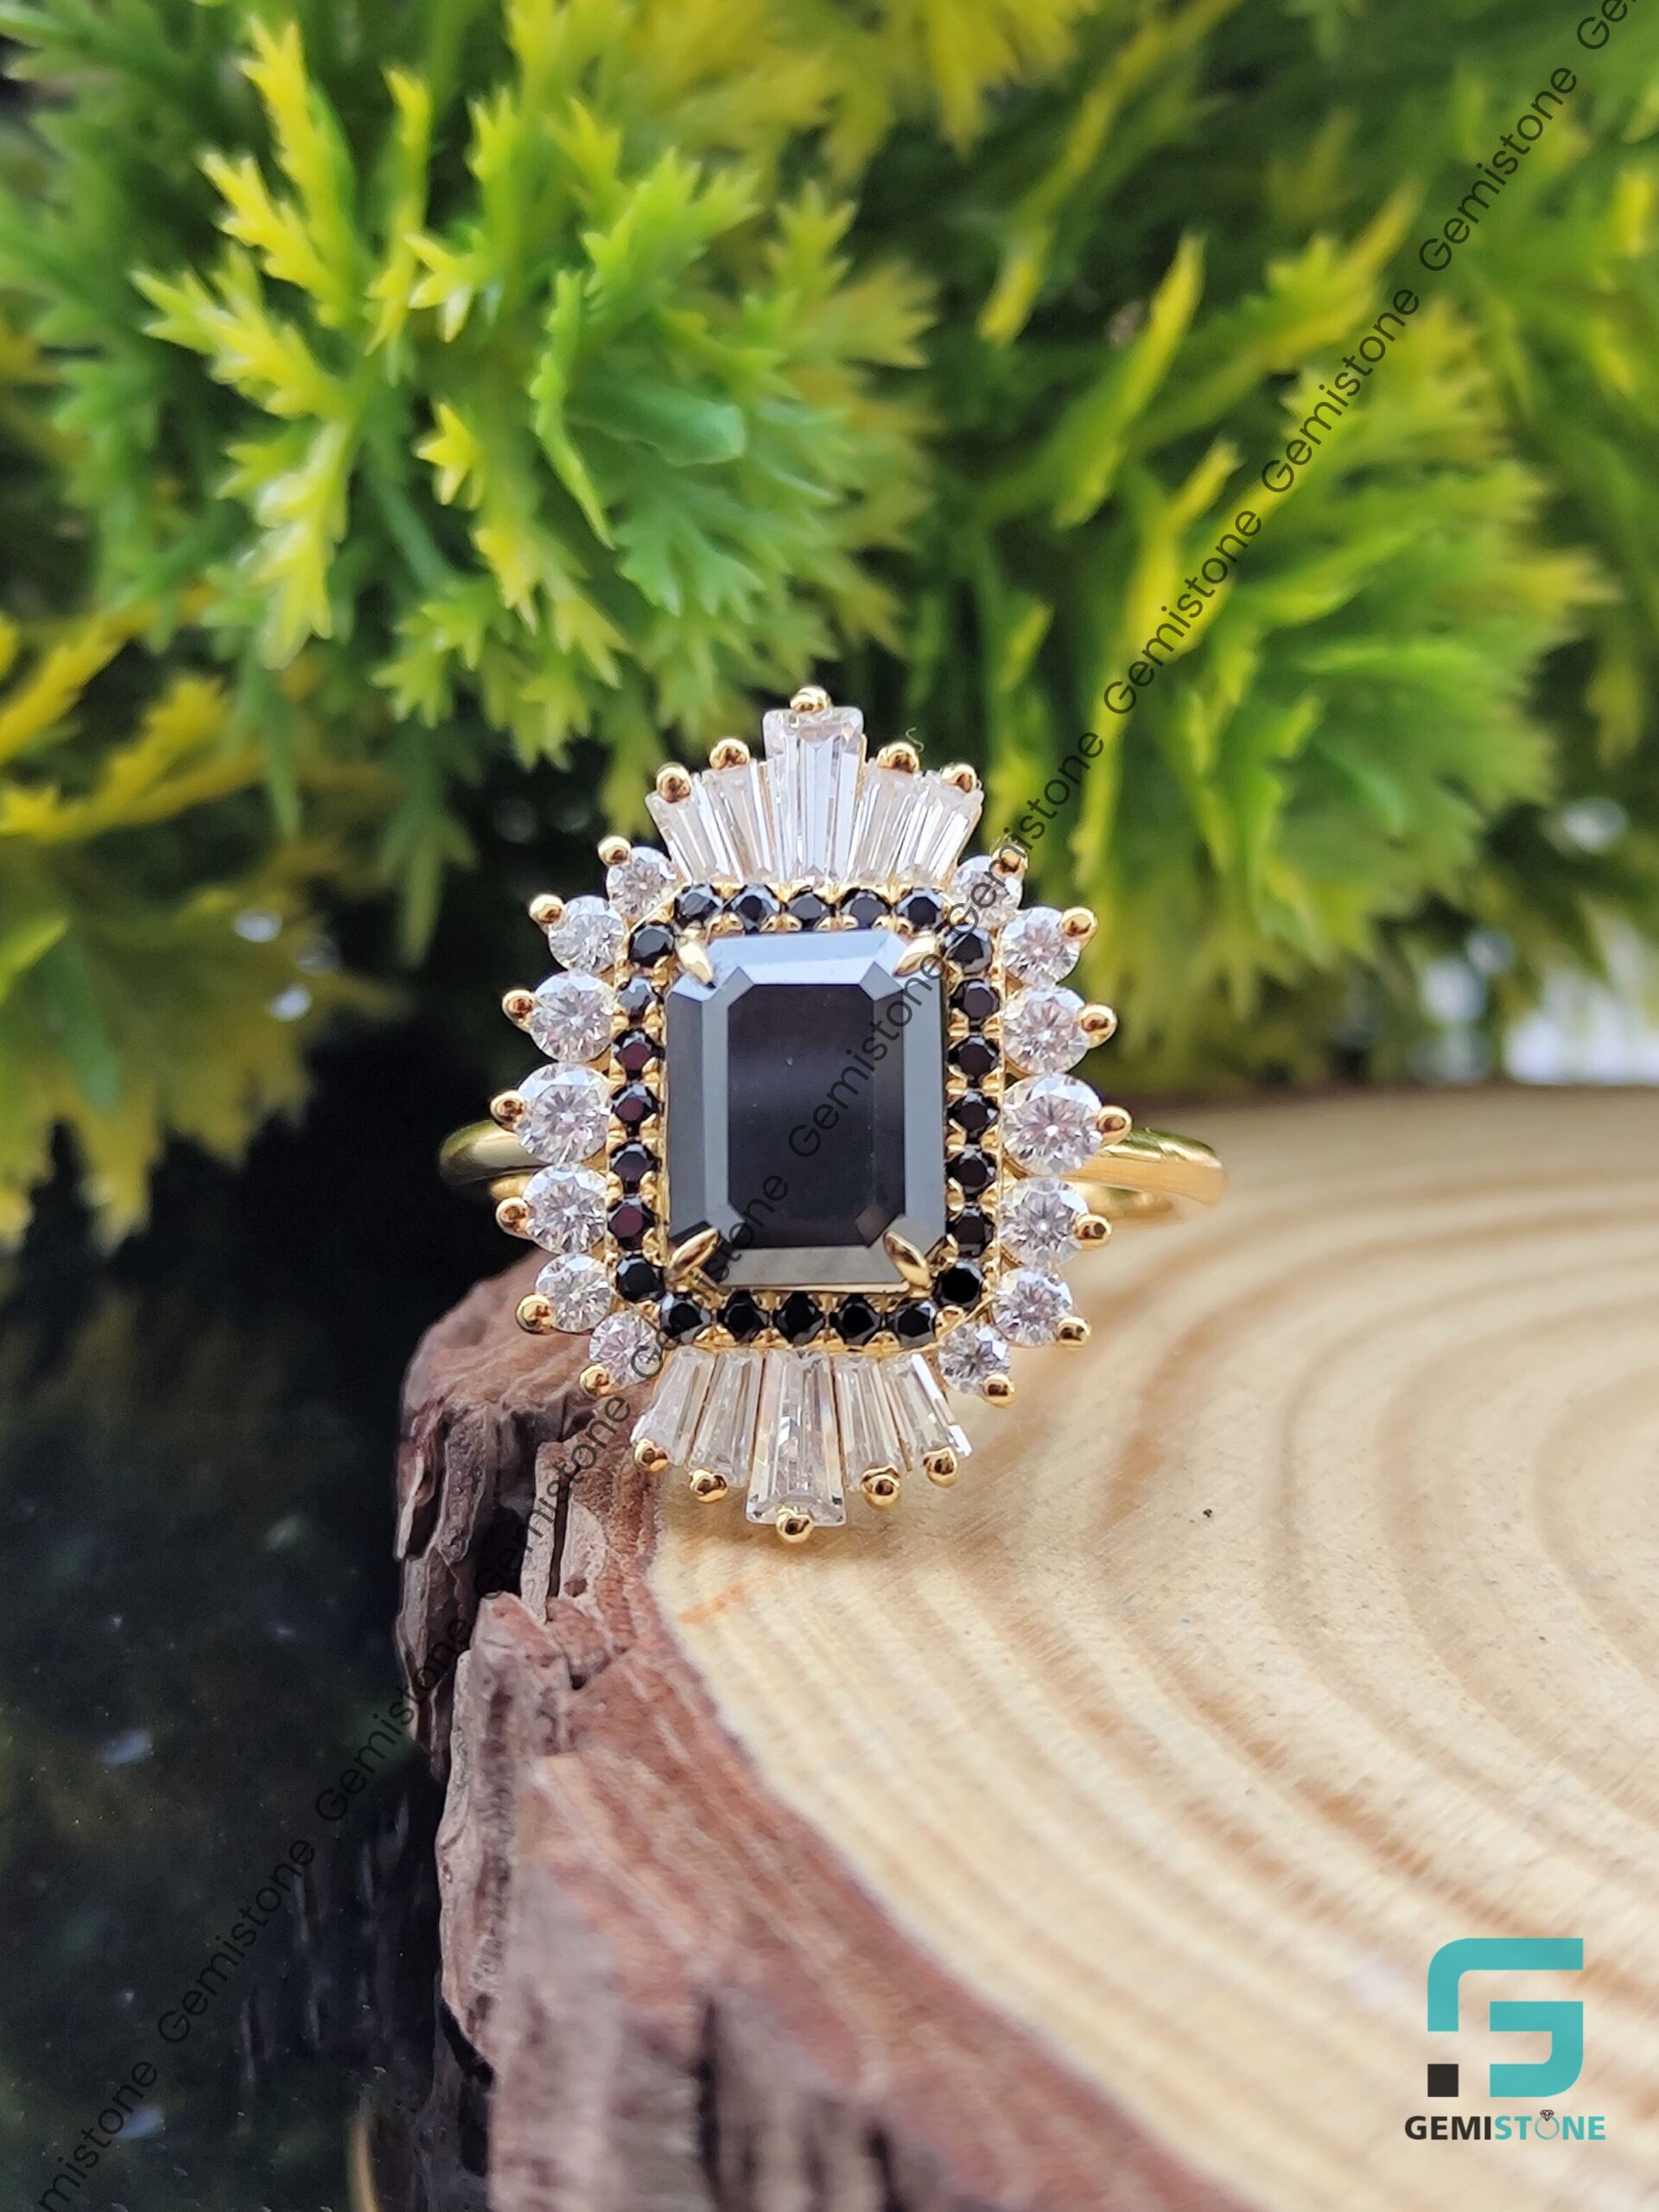 Why do so many people wear rings with a black gemstone? What kind of  gemstone is that? - Quora